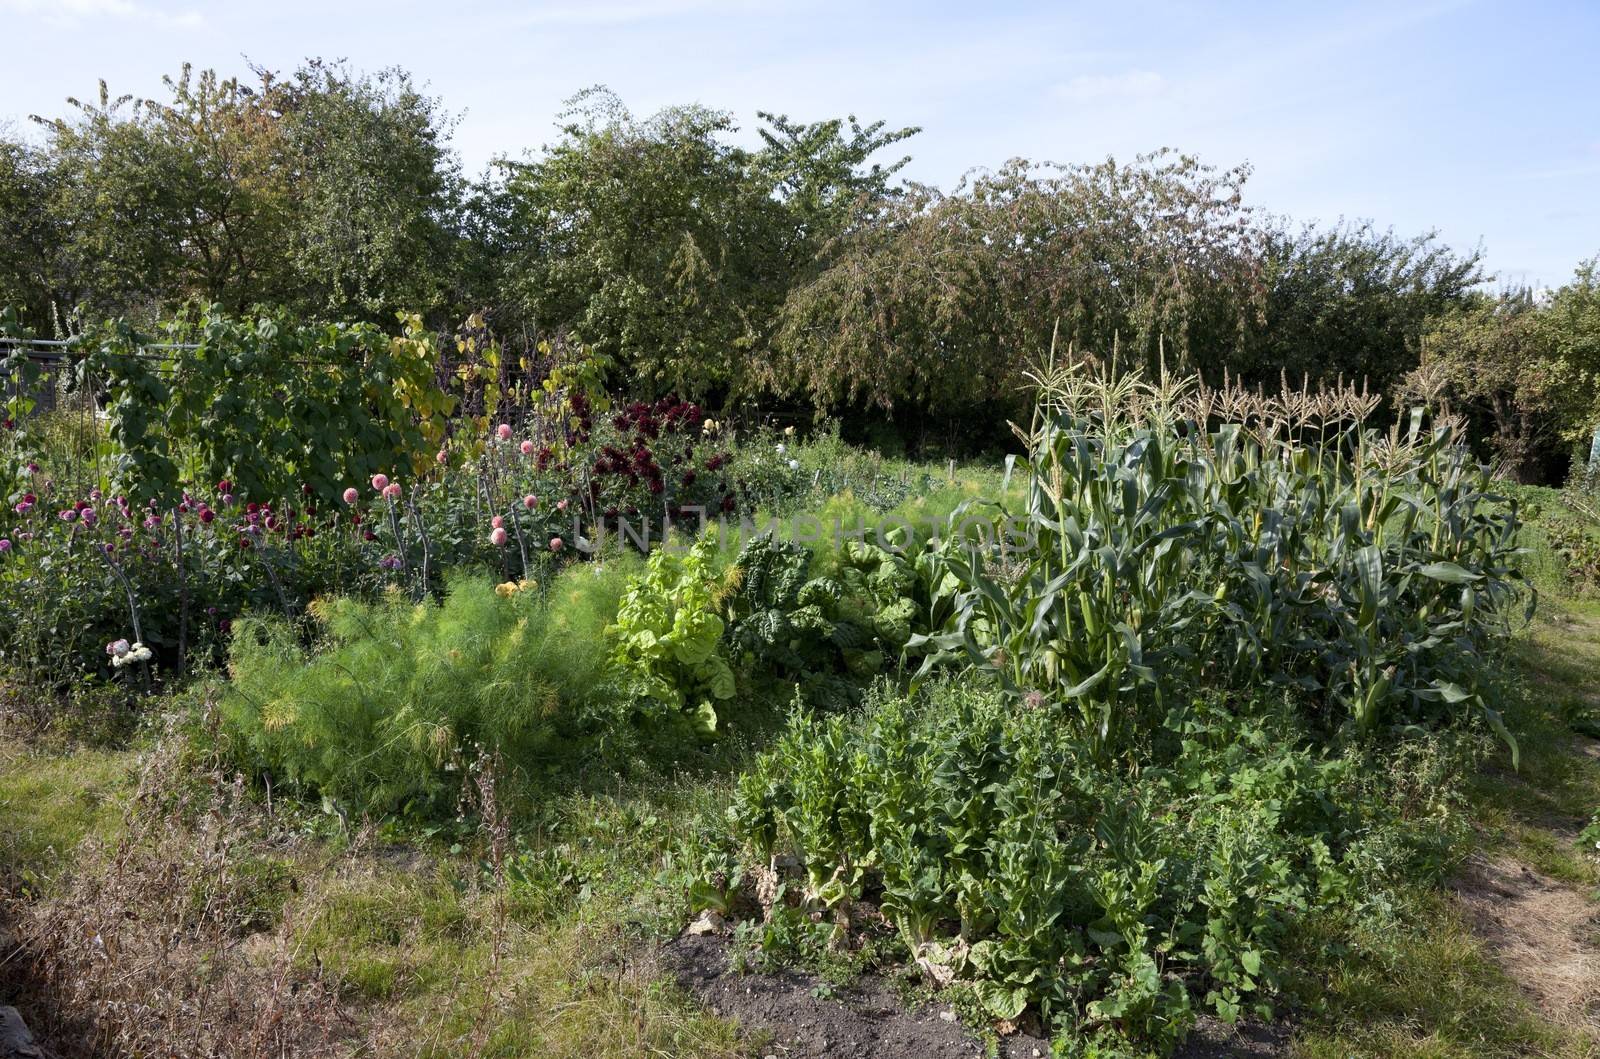 Allotments showing flower and vegetable plots, England.